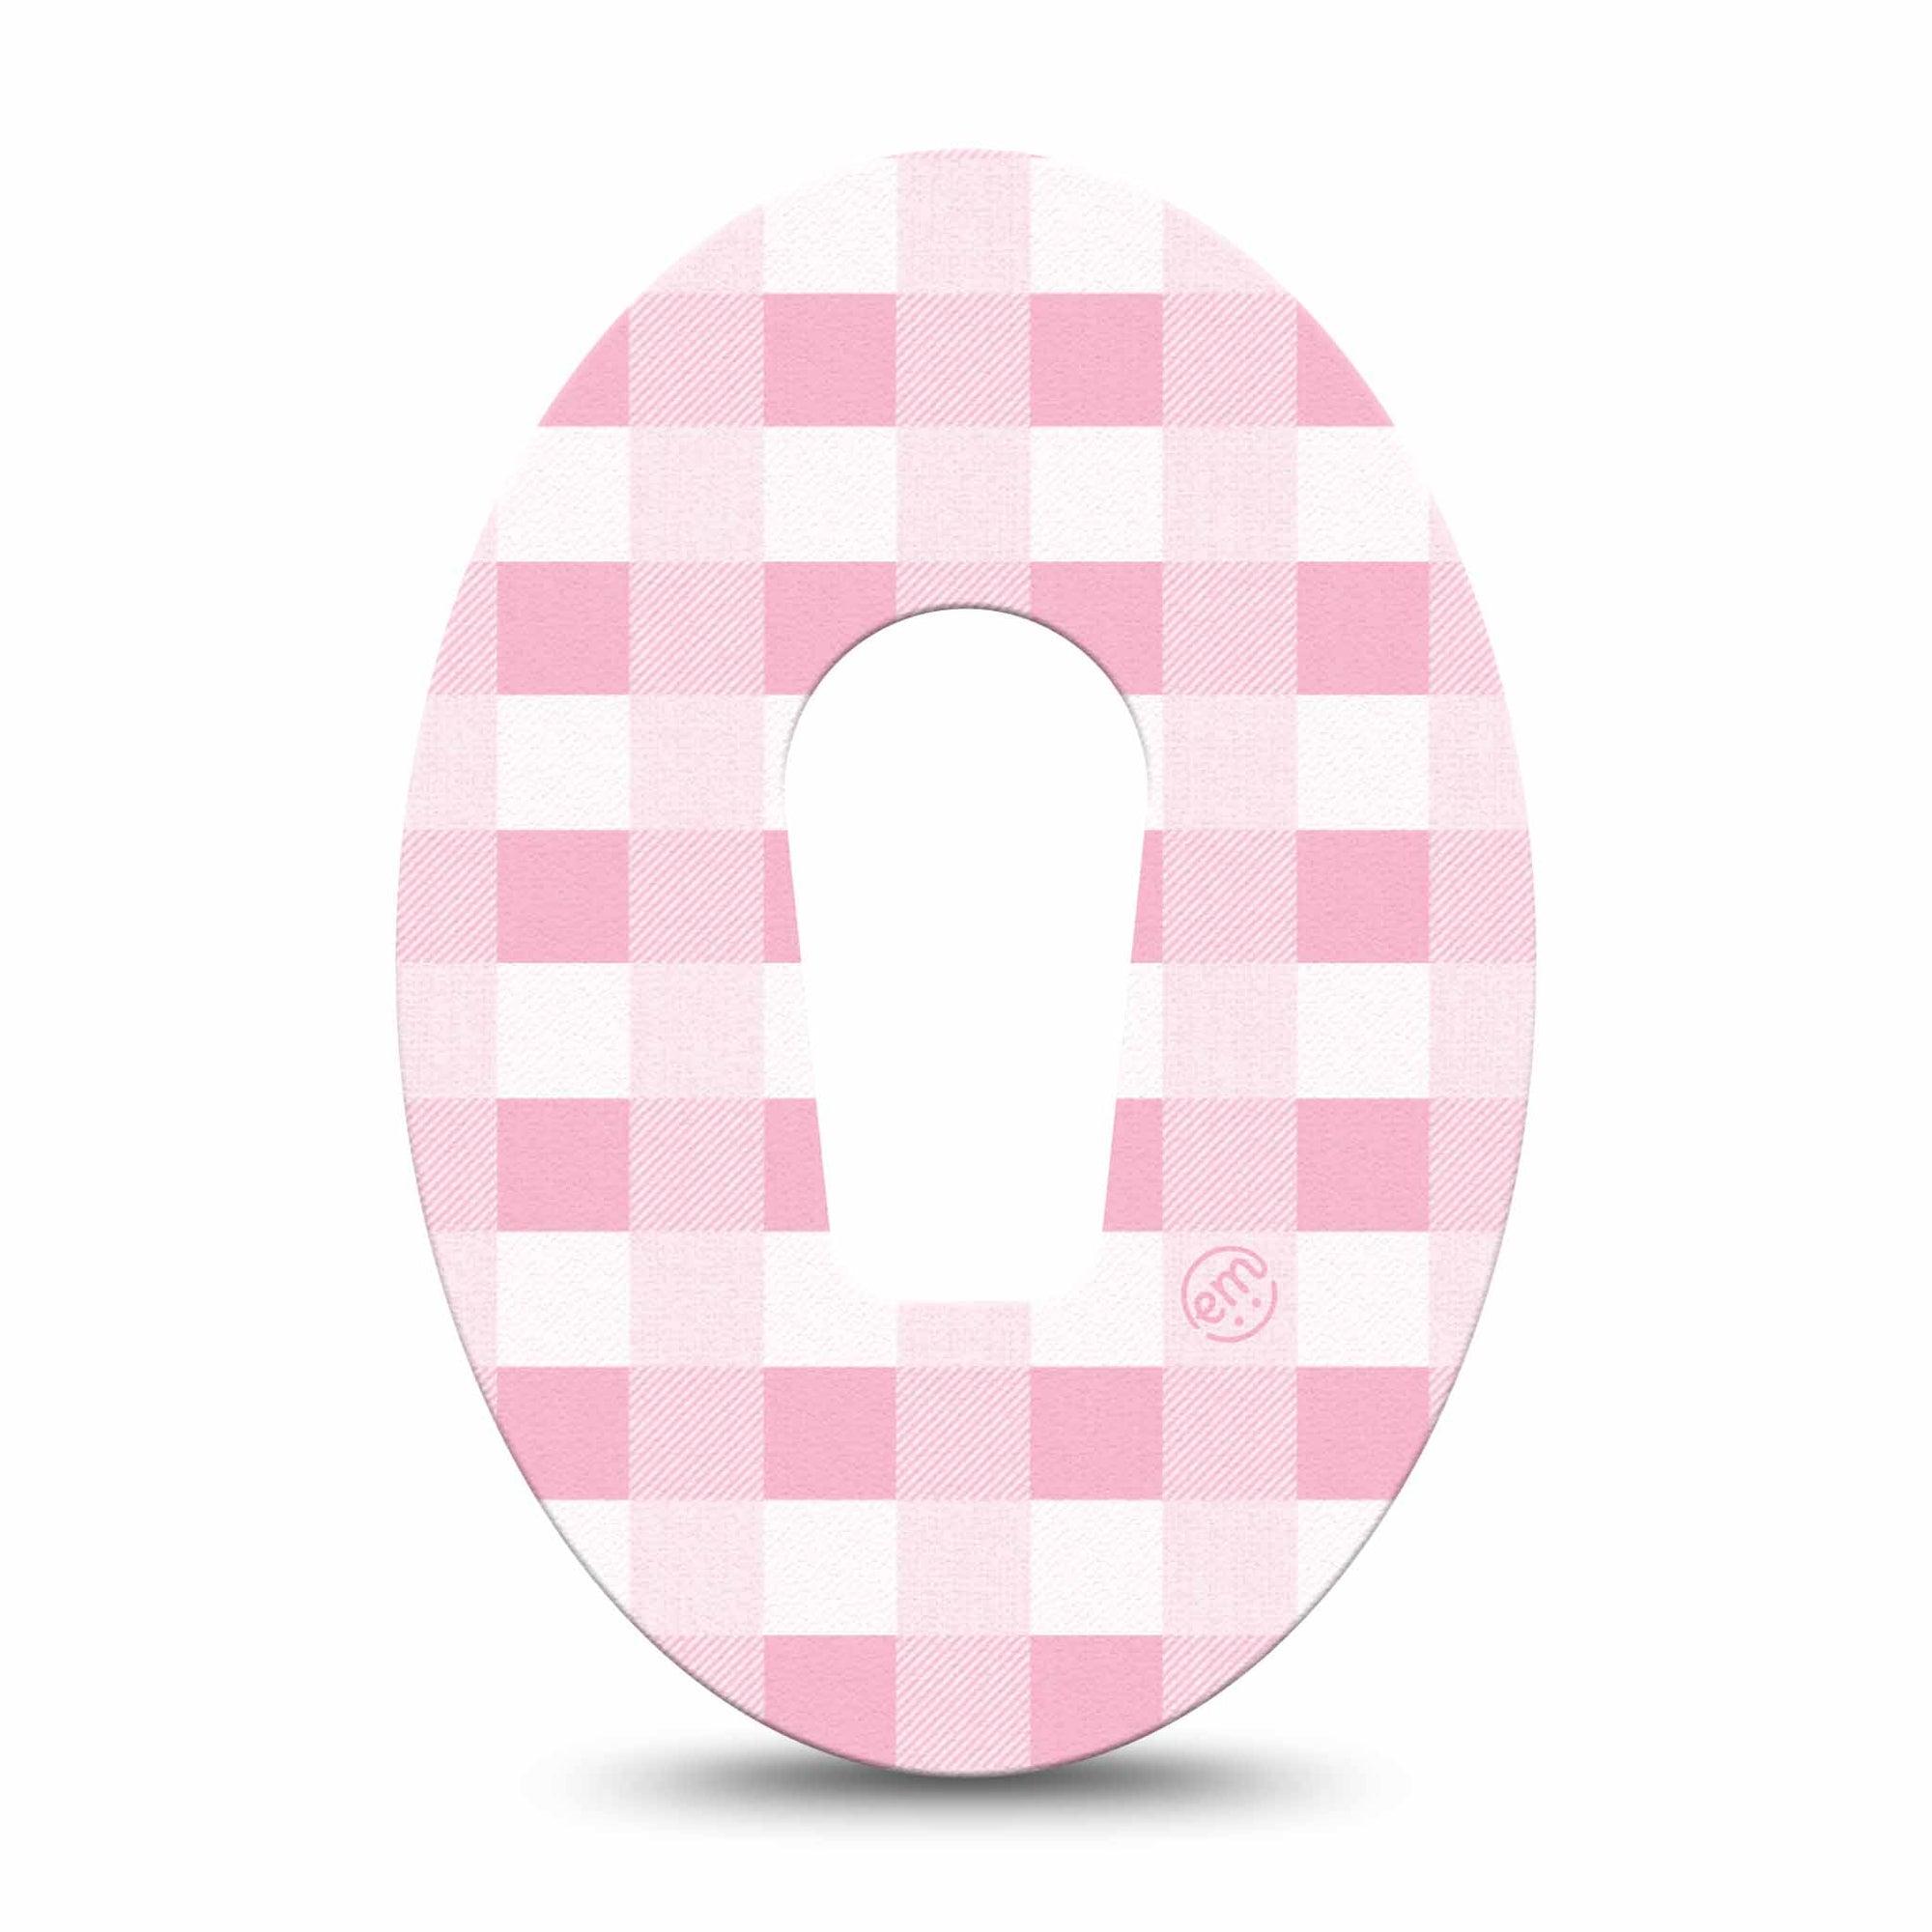 ExpressionMed Pink Gingham Dexcom G6 Tape, Single, Striped Light Colors Themed, CGM Plaster Patch Design